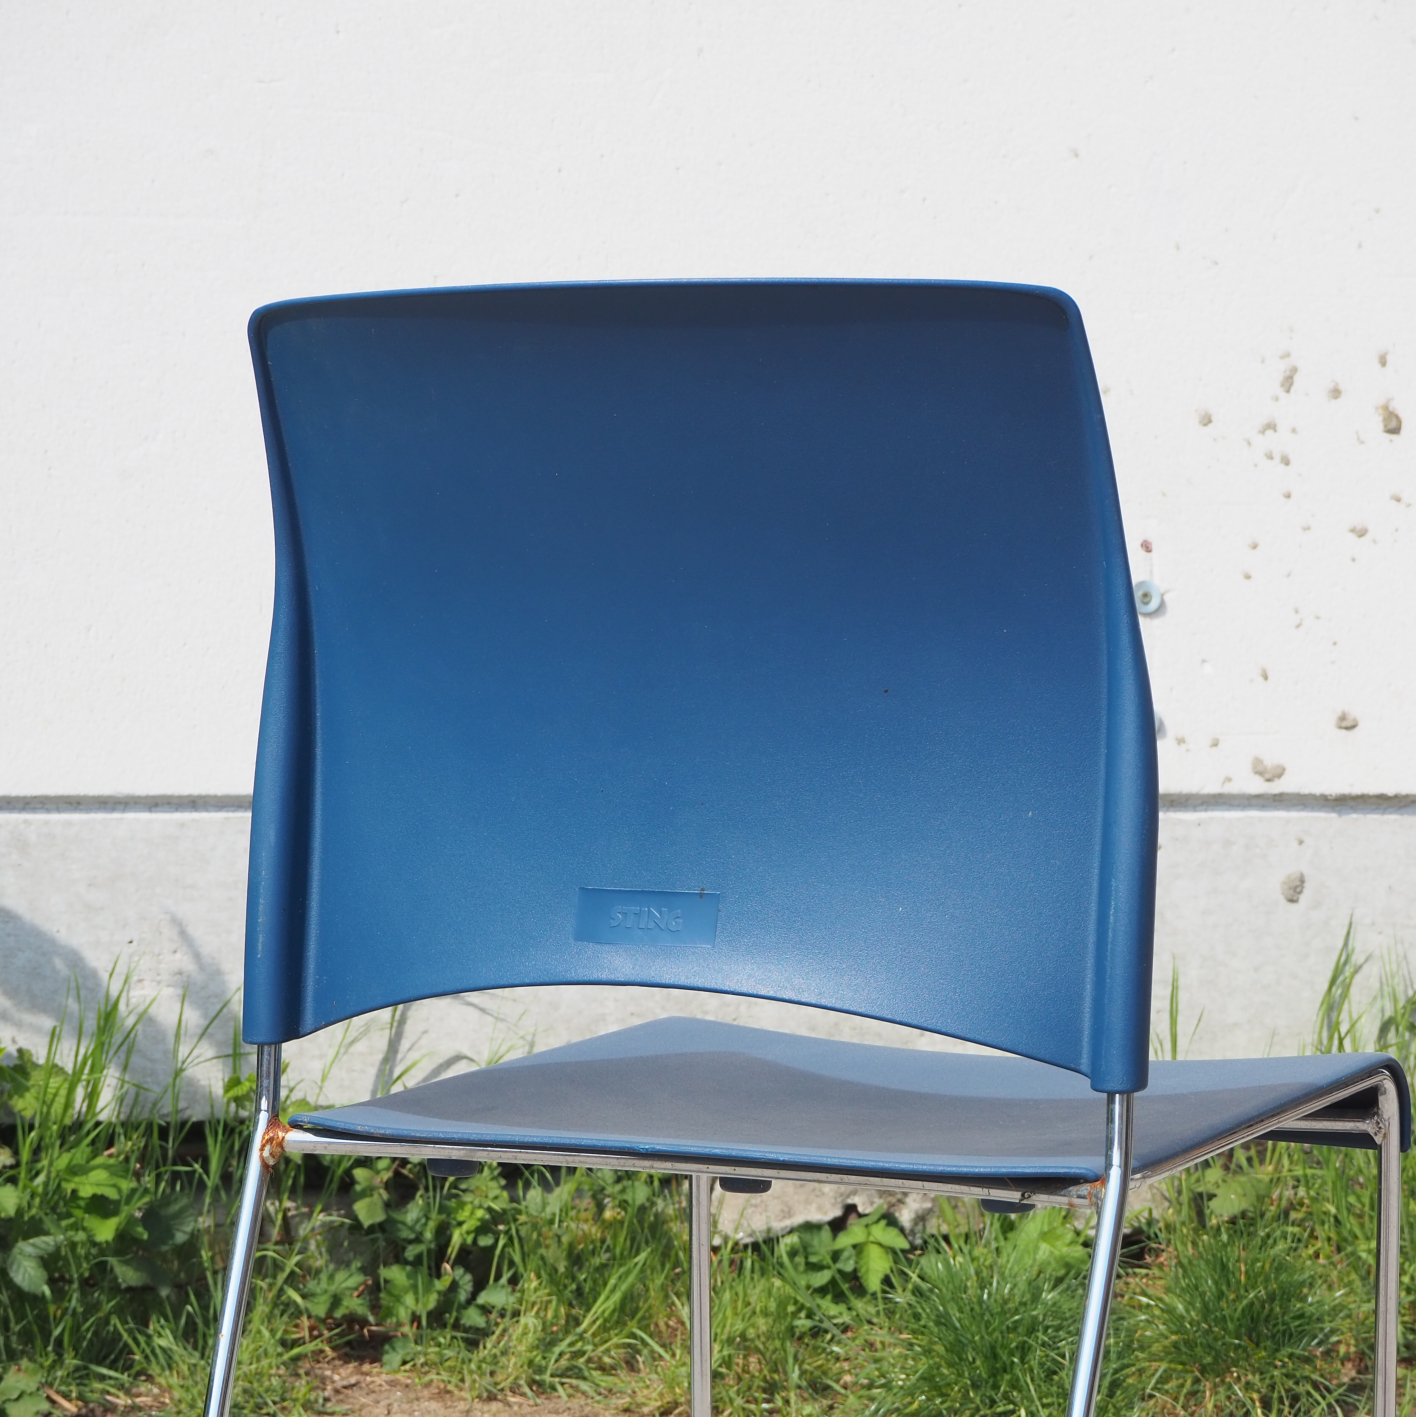 Blue stackable chair 'Sting' by Kim Sang Kyu for Patra